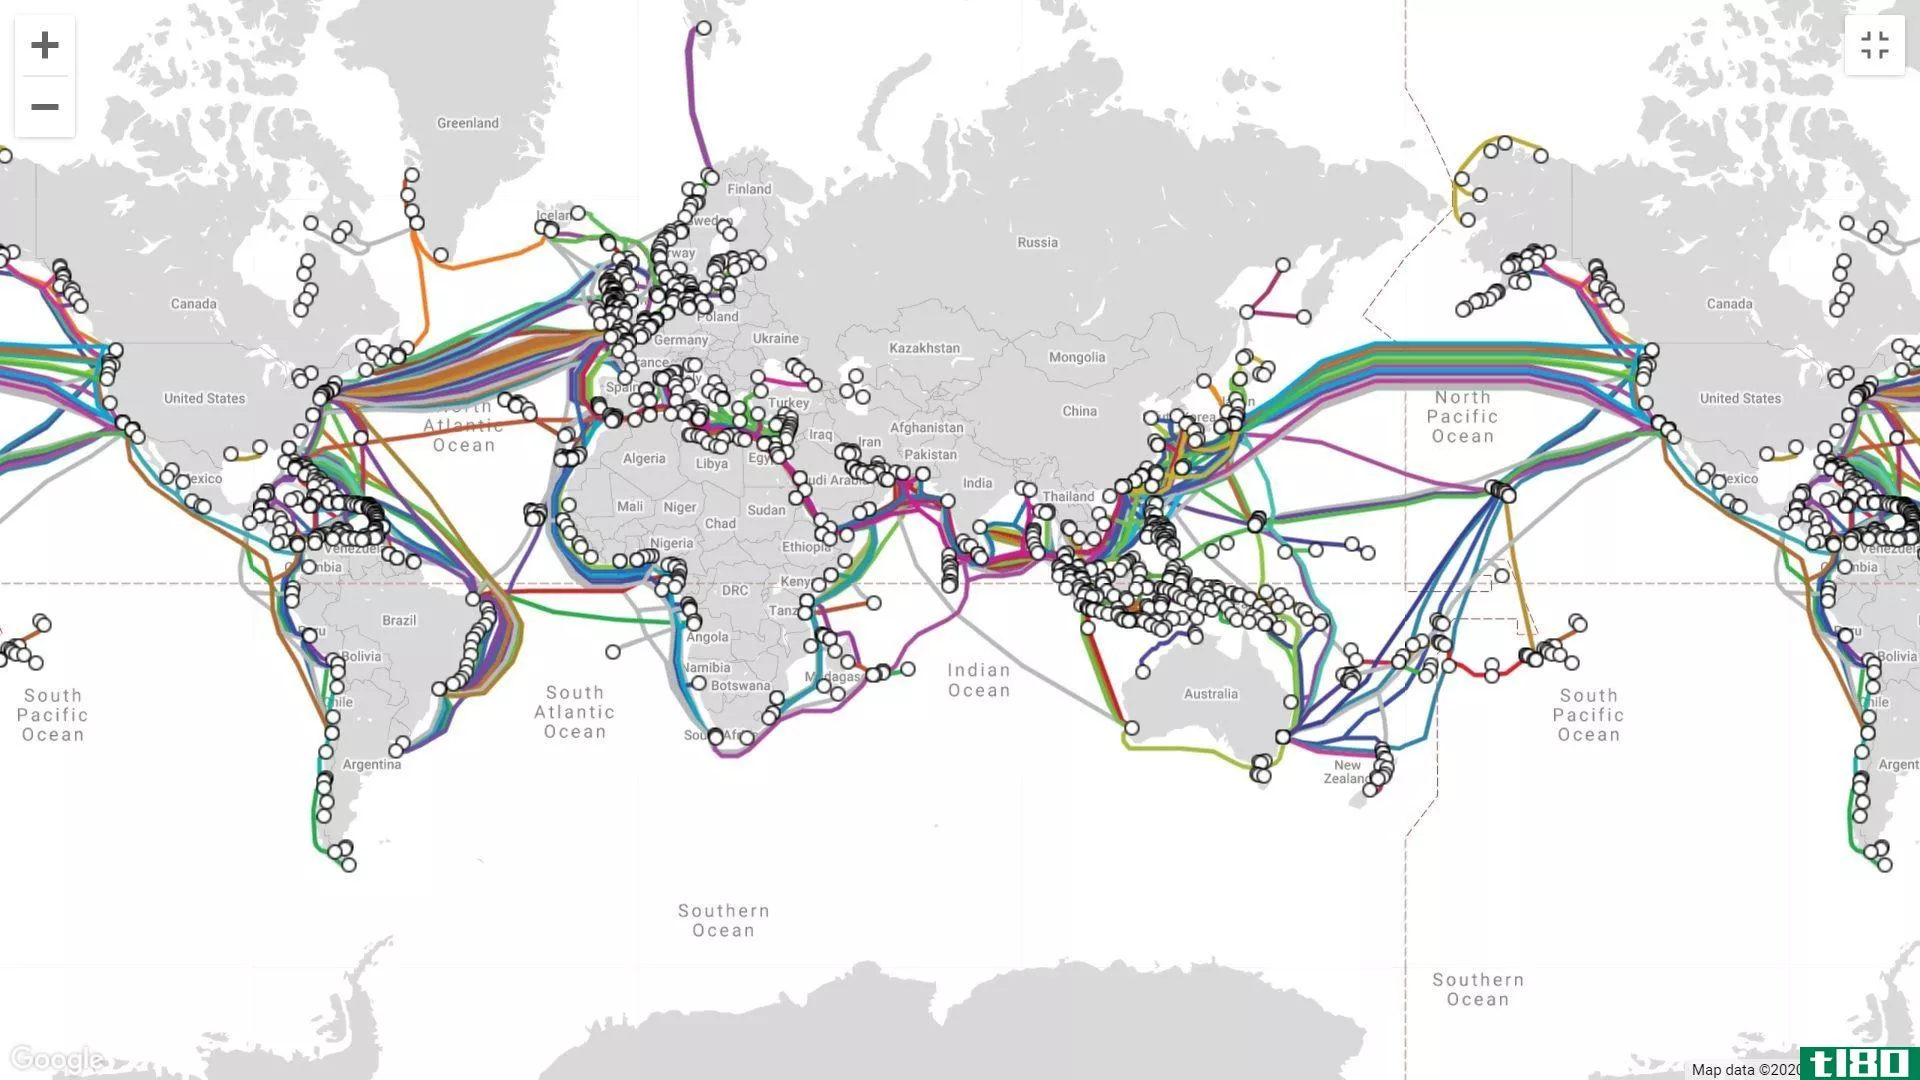 submarine cable map website